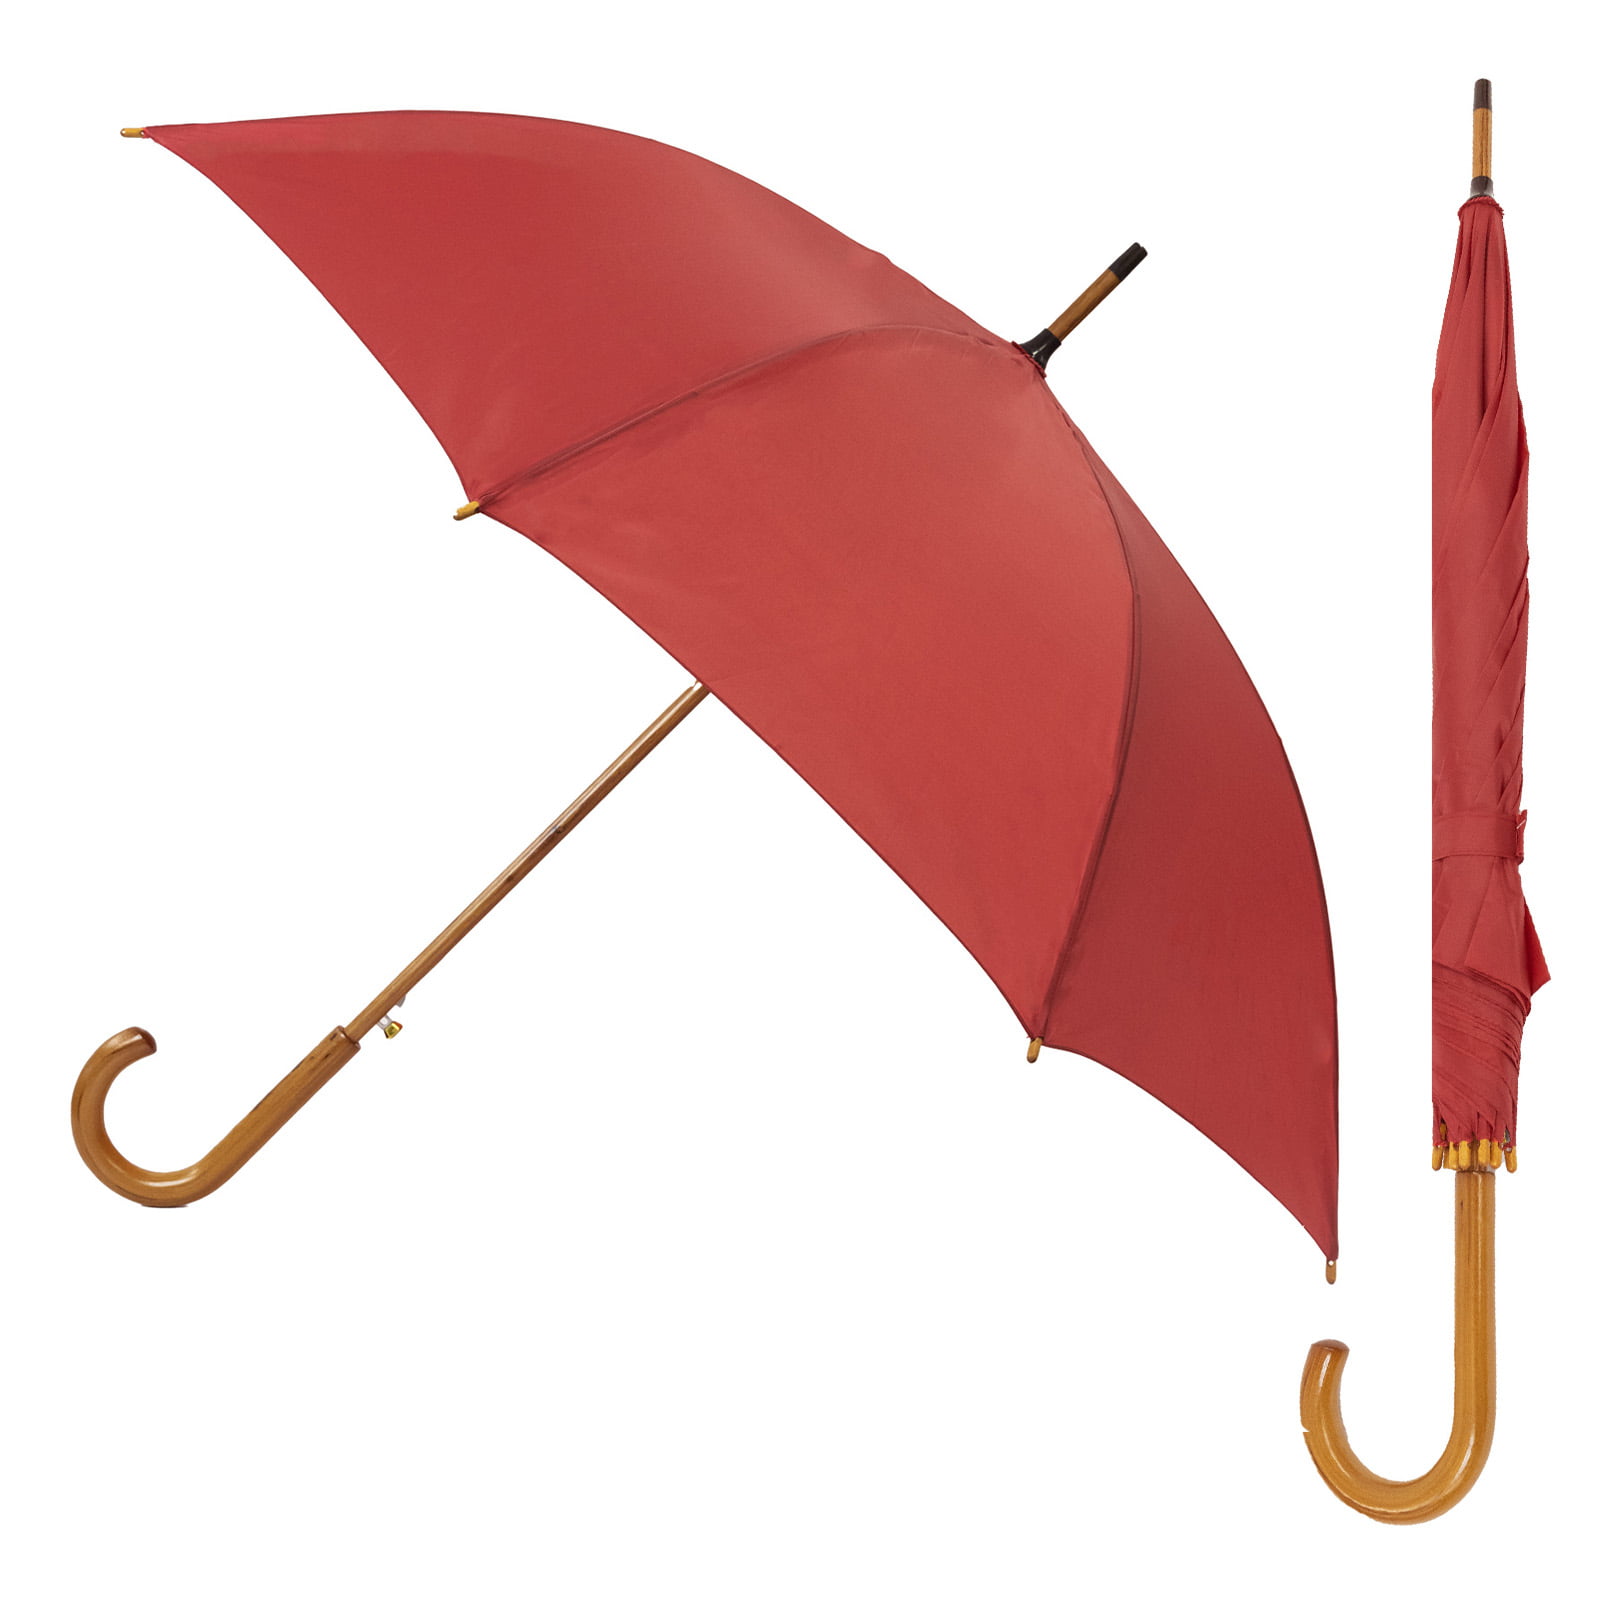 Red Wood Stick Umbrella composite image showing both open and closed